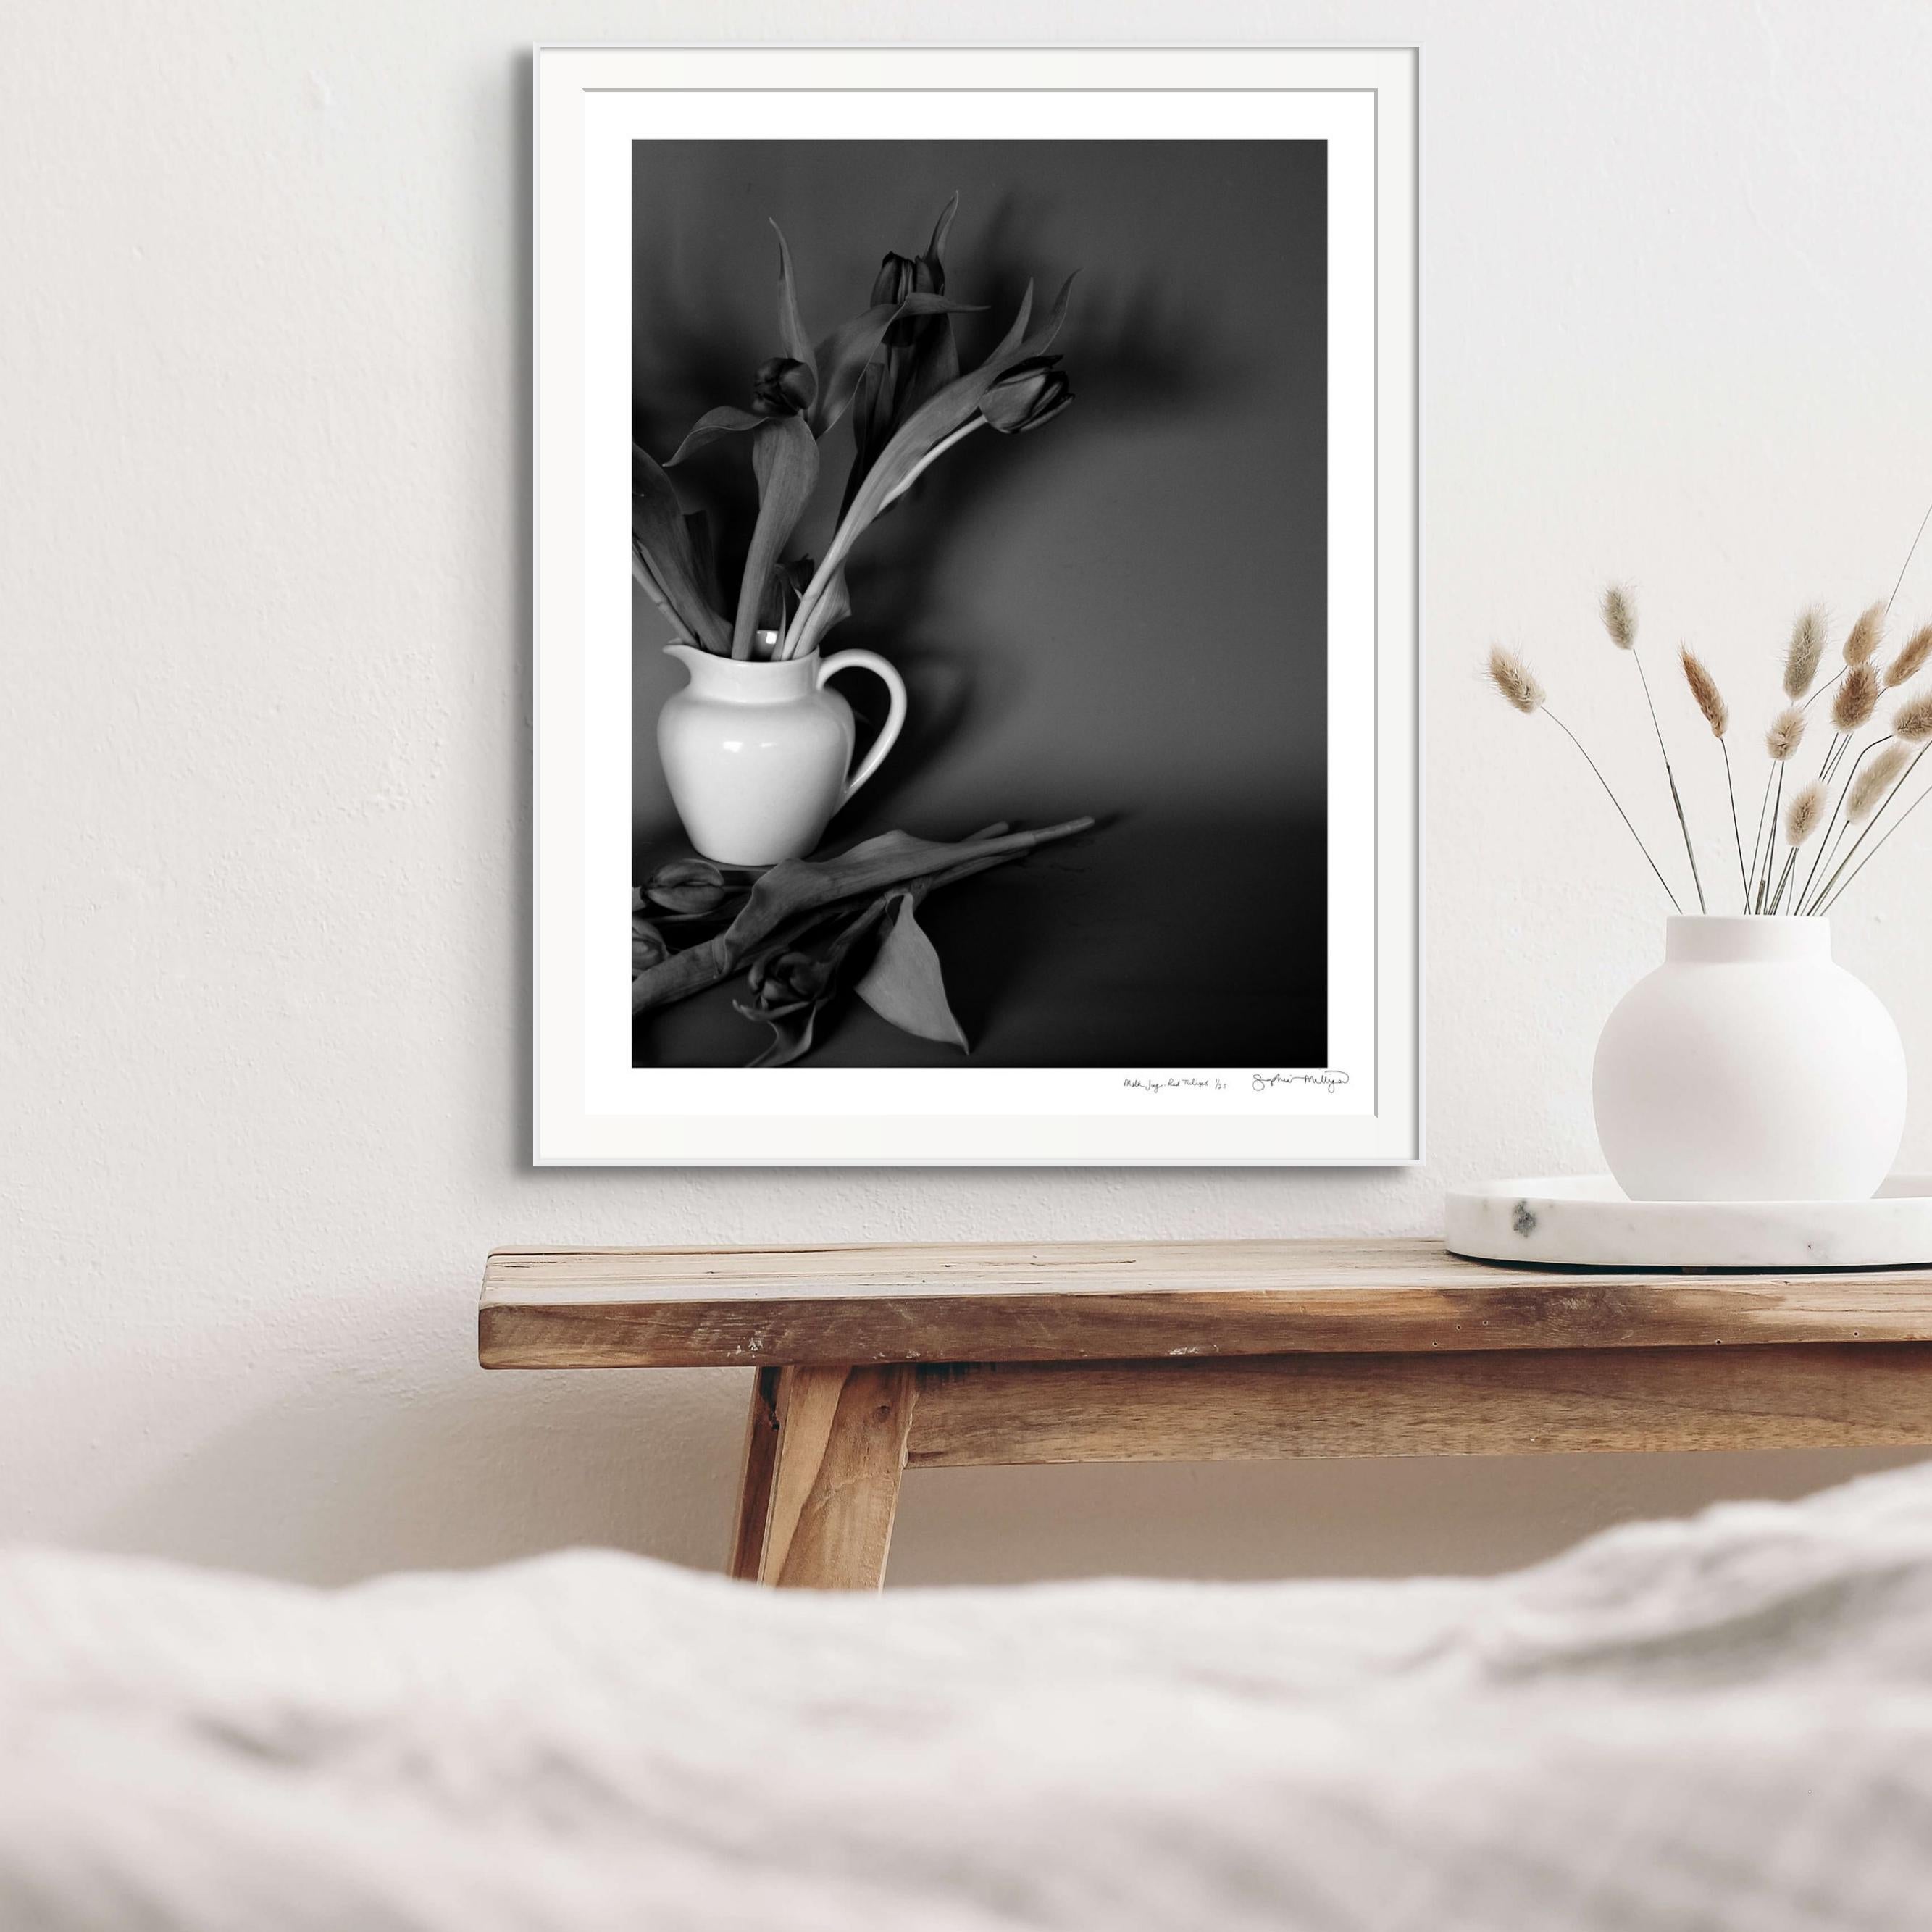 'Milk Jug, Red Tulips' Limited Edition Photograph. Minimal Botanical Still Life  For Sale 4